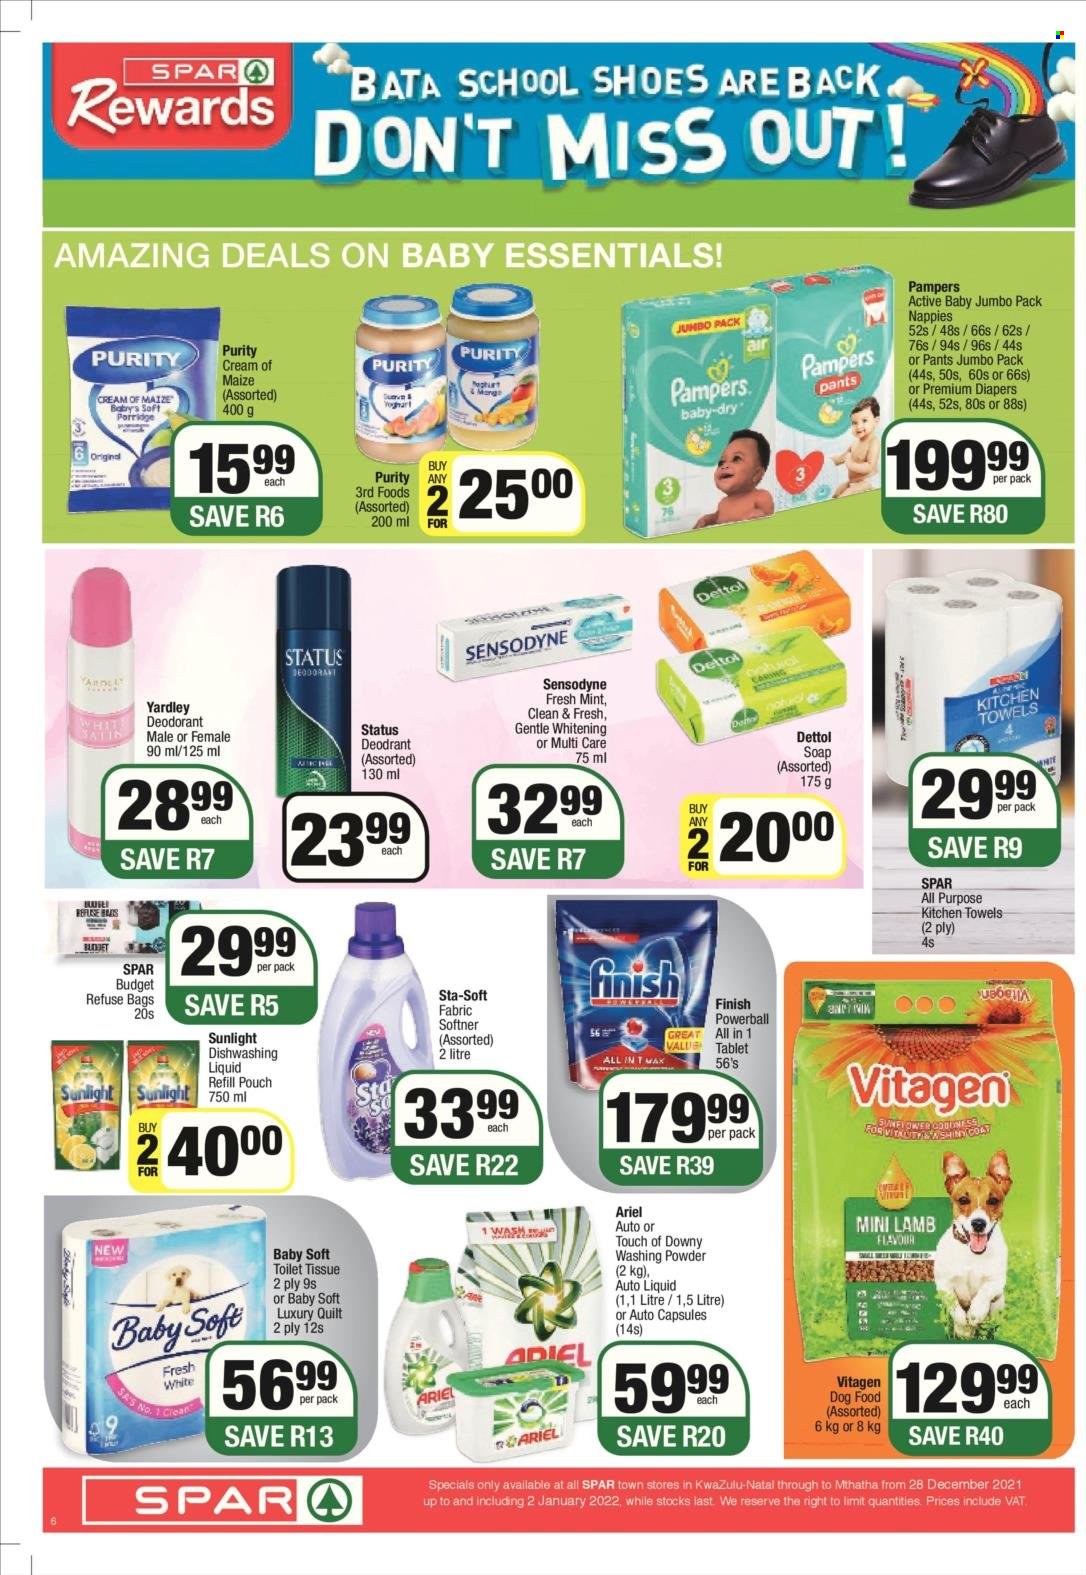 SPAR catalogue  - 28/12/2021 - 02/01/2022 - Sales products - porridge, Purity, Pampers, pants, nappies, Baby Soft, Dettol, toilet paper, kitchen towels, Ariel, laundry powder, Sunlight, dishwashing liquid, Finish Powerball, soap, Sensodyne, anti-perspirant, Yardley, deodorant, refuse bag, animal food, dog food, essentials. Page 6.